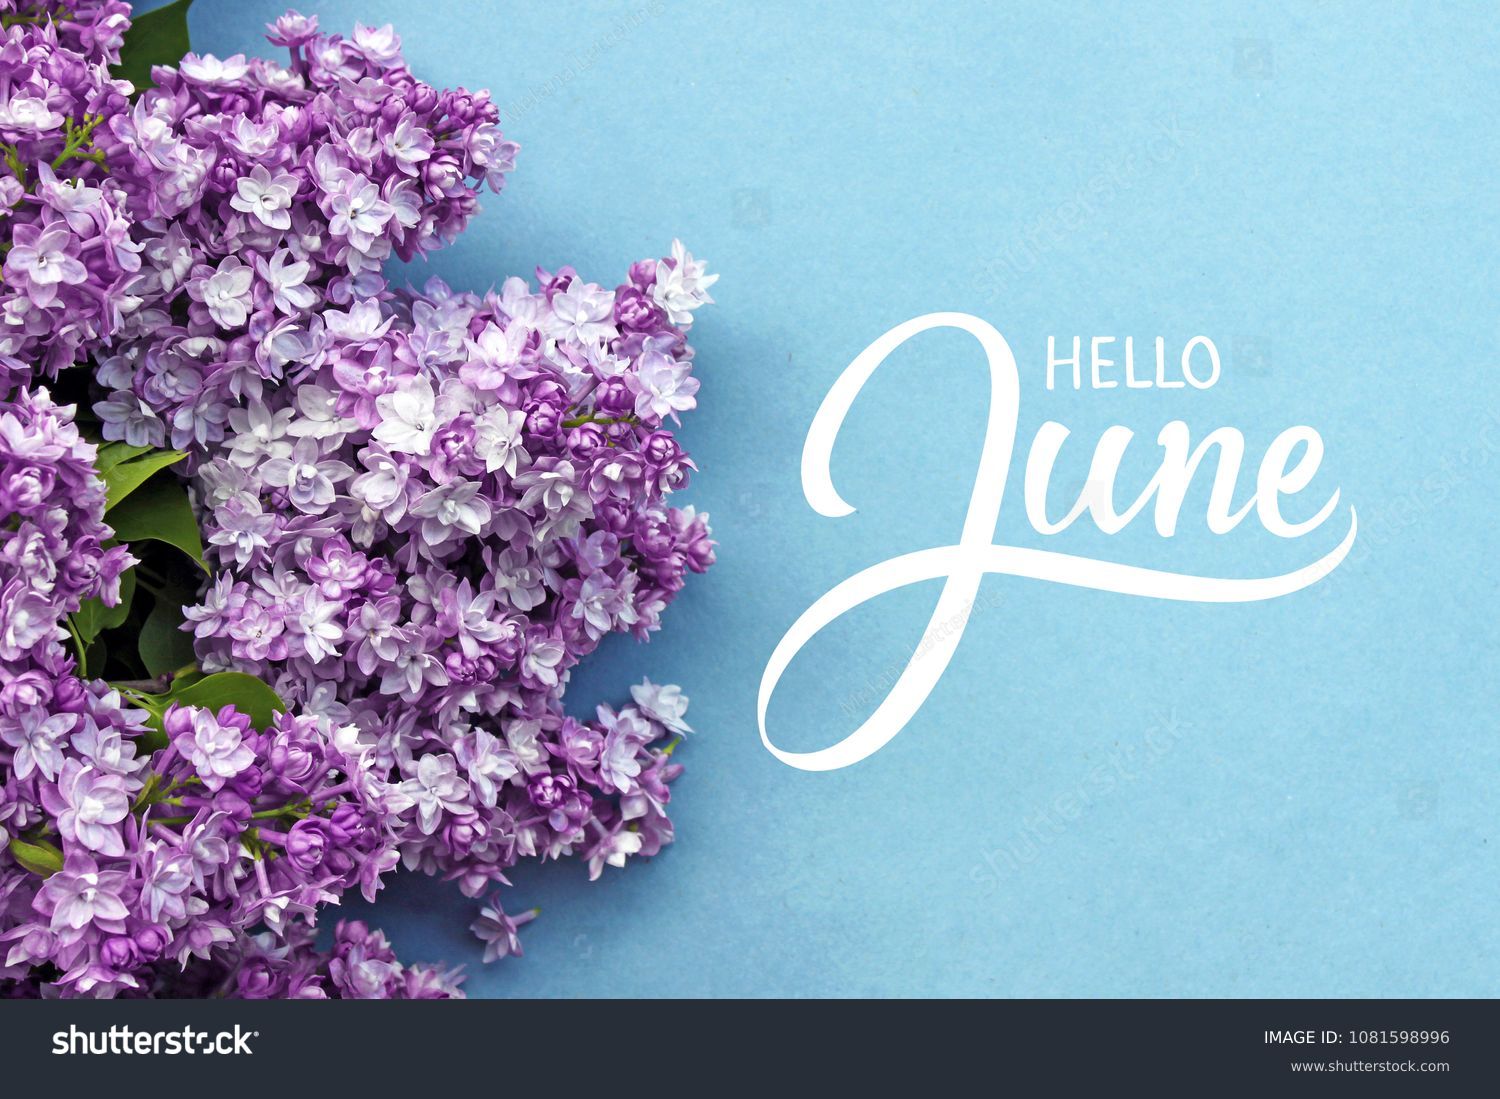 Hello June hand lettering card. Summer lilac flowers on blue background. #1081598996